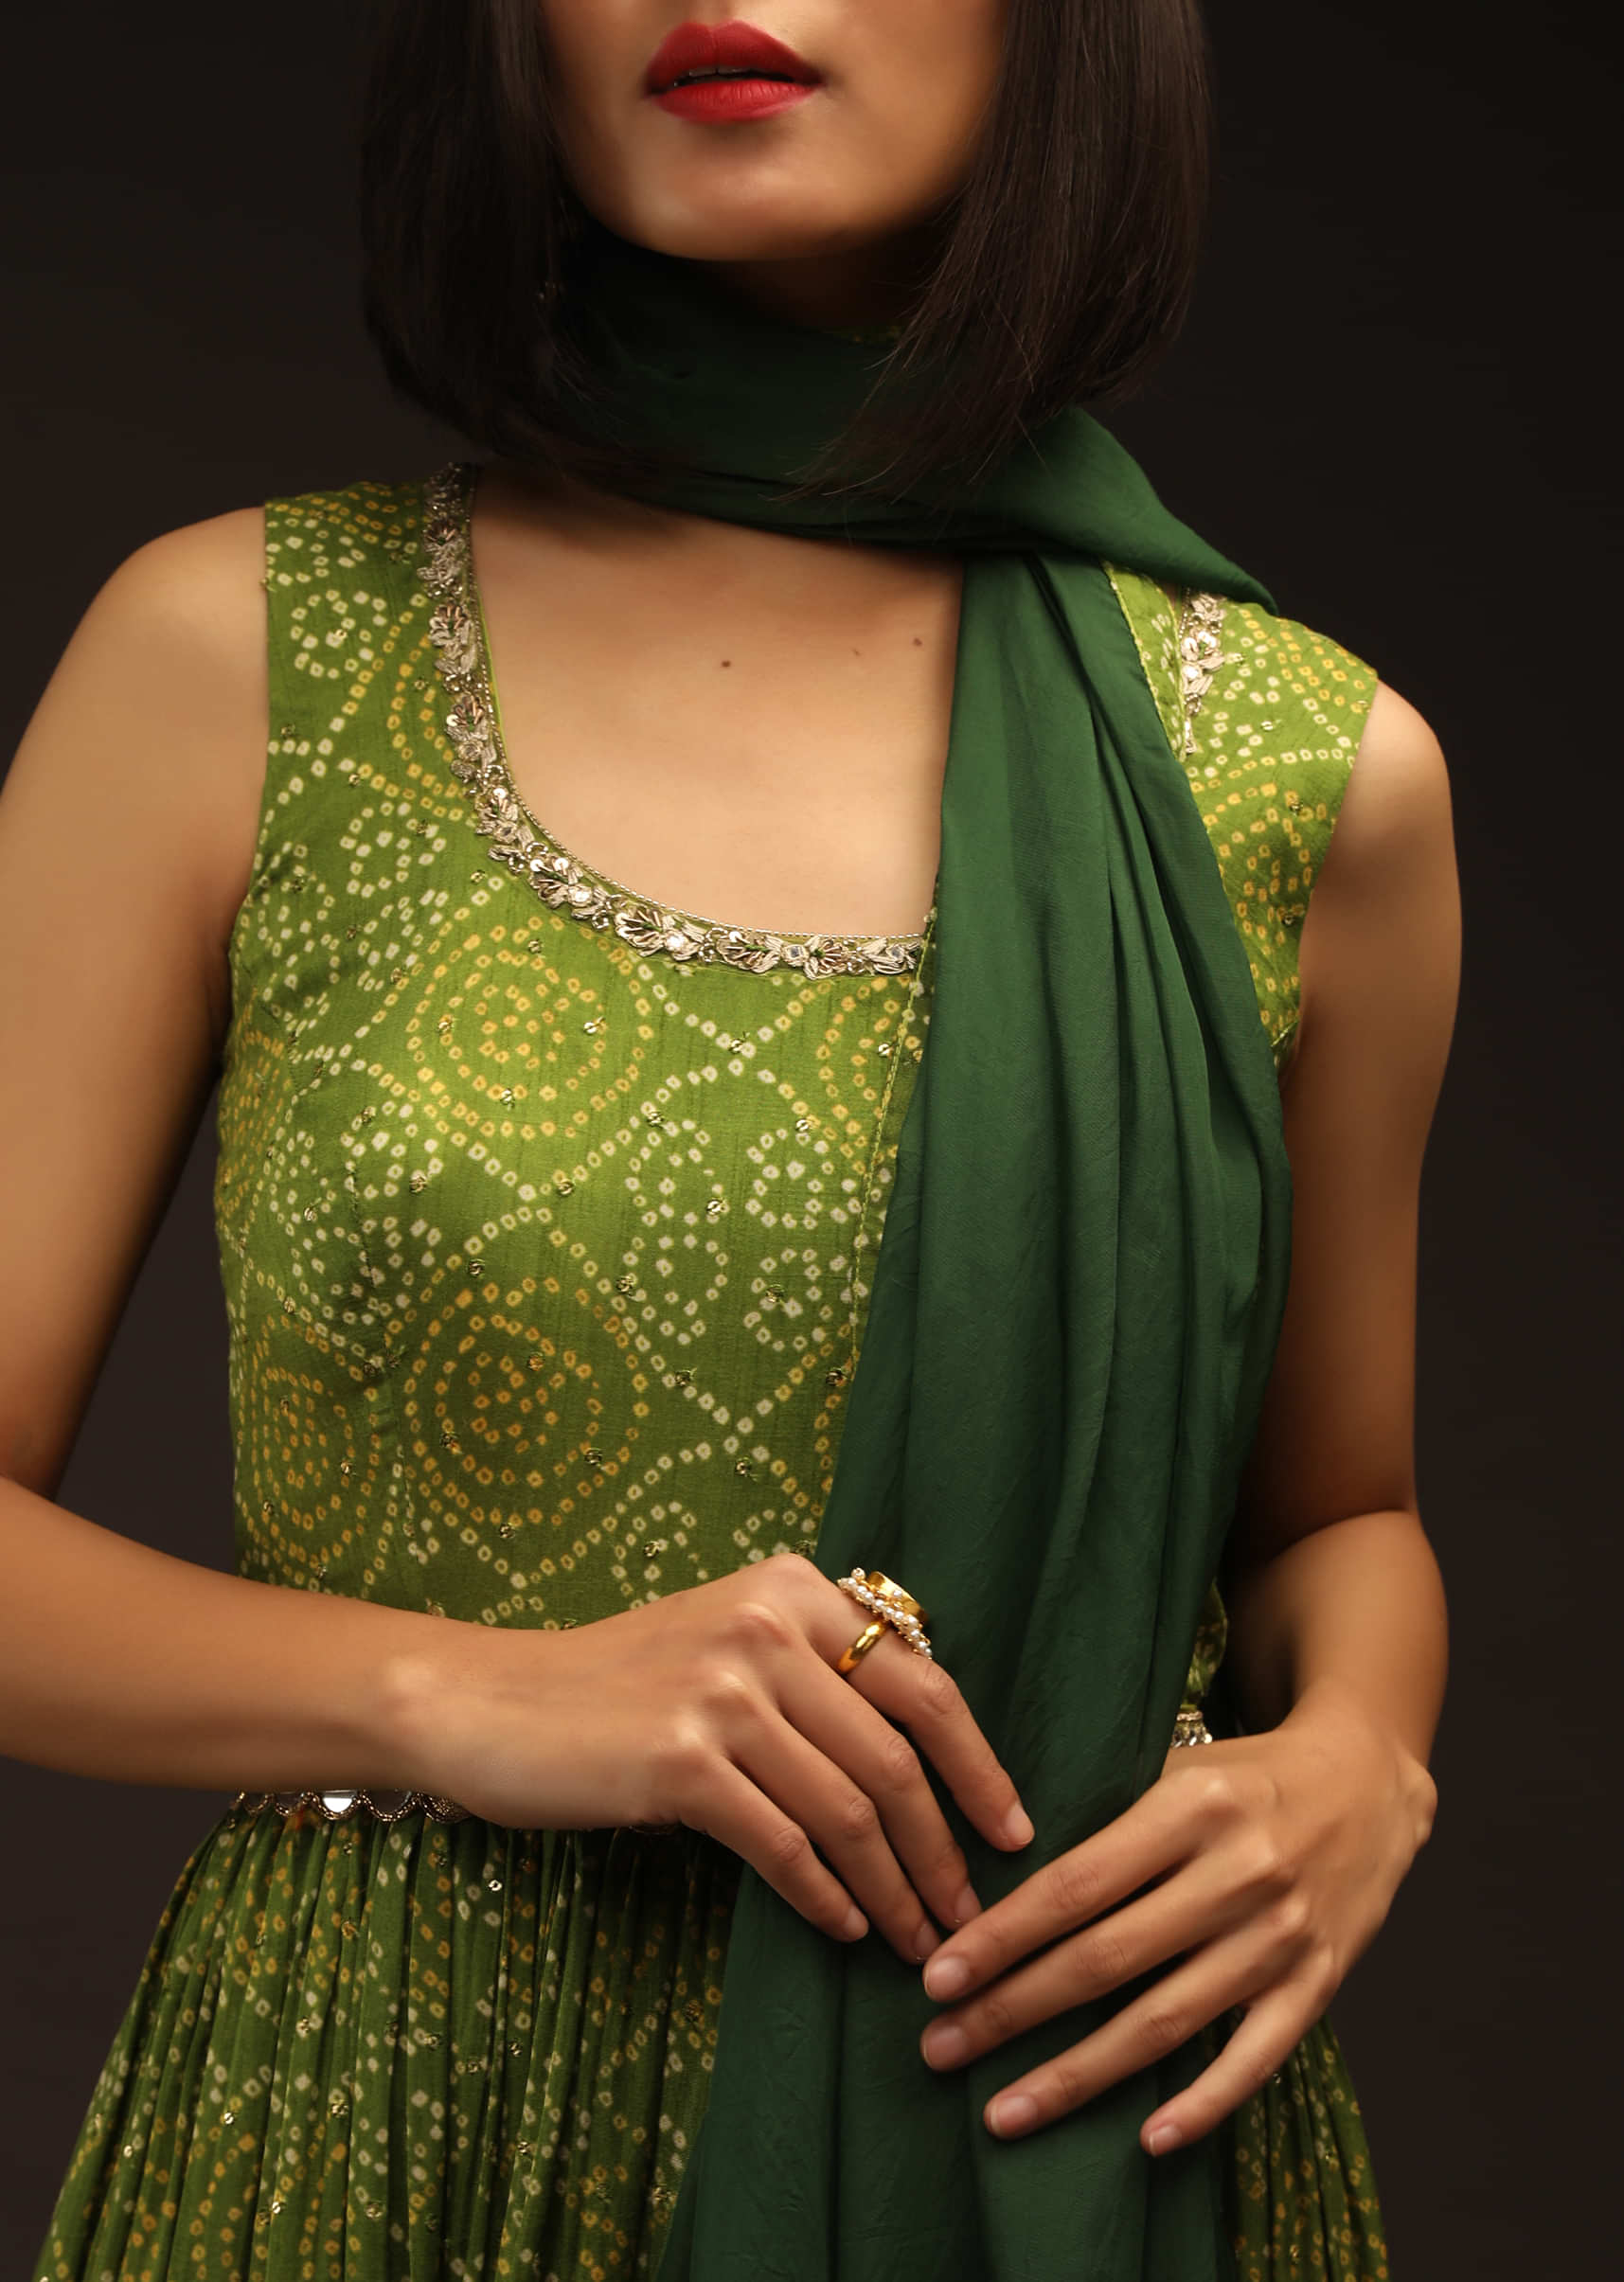 Peridot Green And Olive Ombre Anarkali Suit In Silk With Bandhani Print And Mirror Embroidery